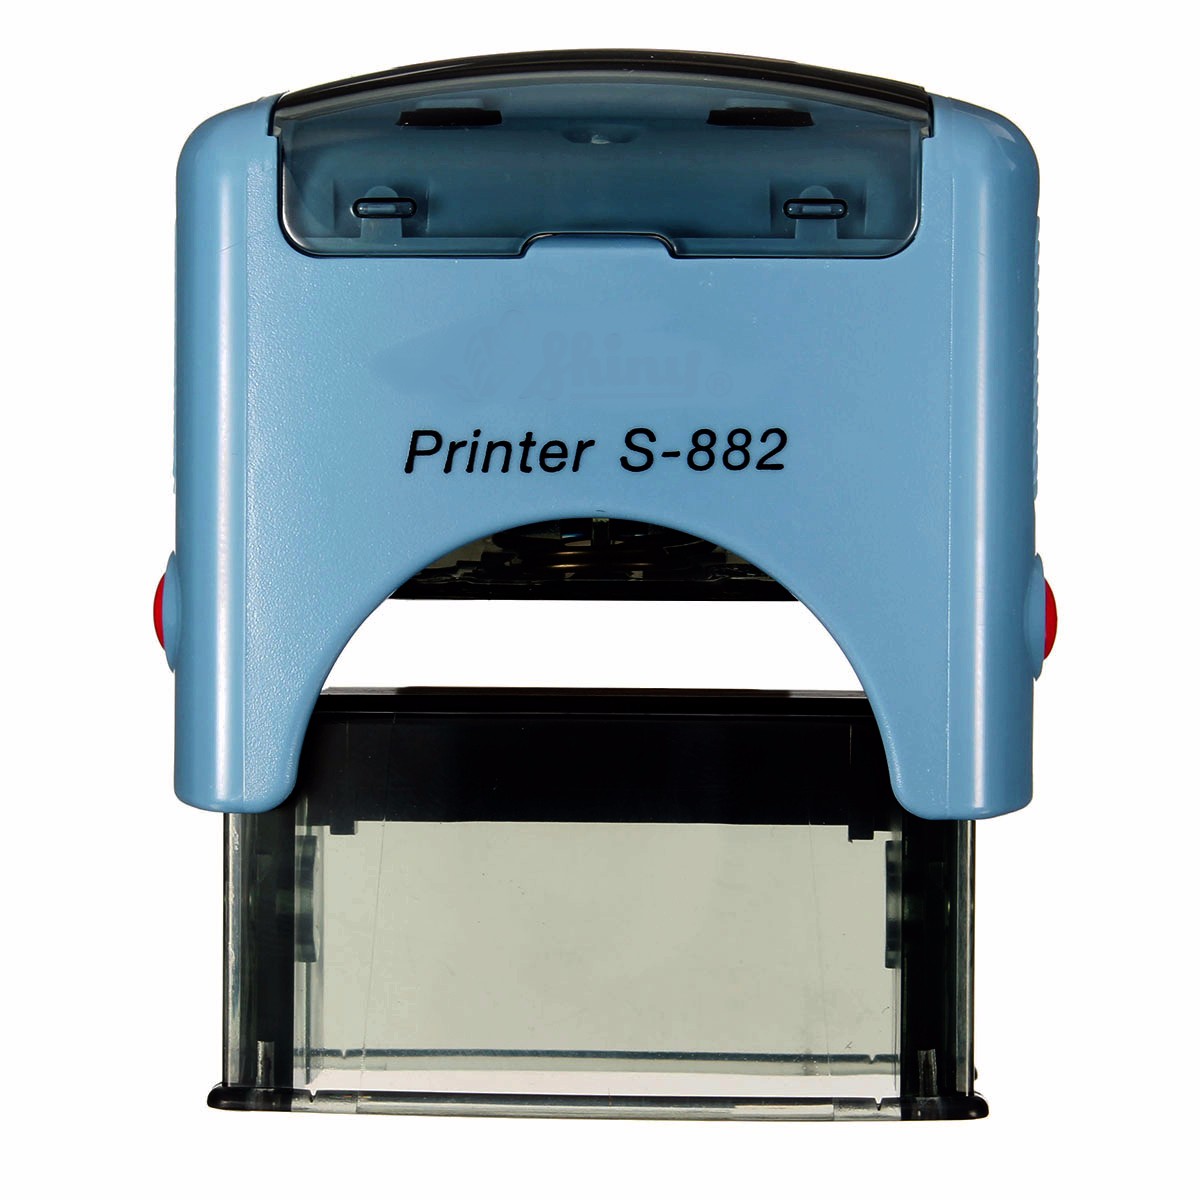 Custom-Personalised-Business-Name-Address-DIY-Self-Inking-Rubber-Stamp-Kit-Suit-1092341